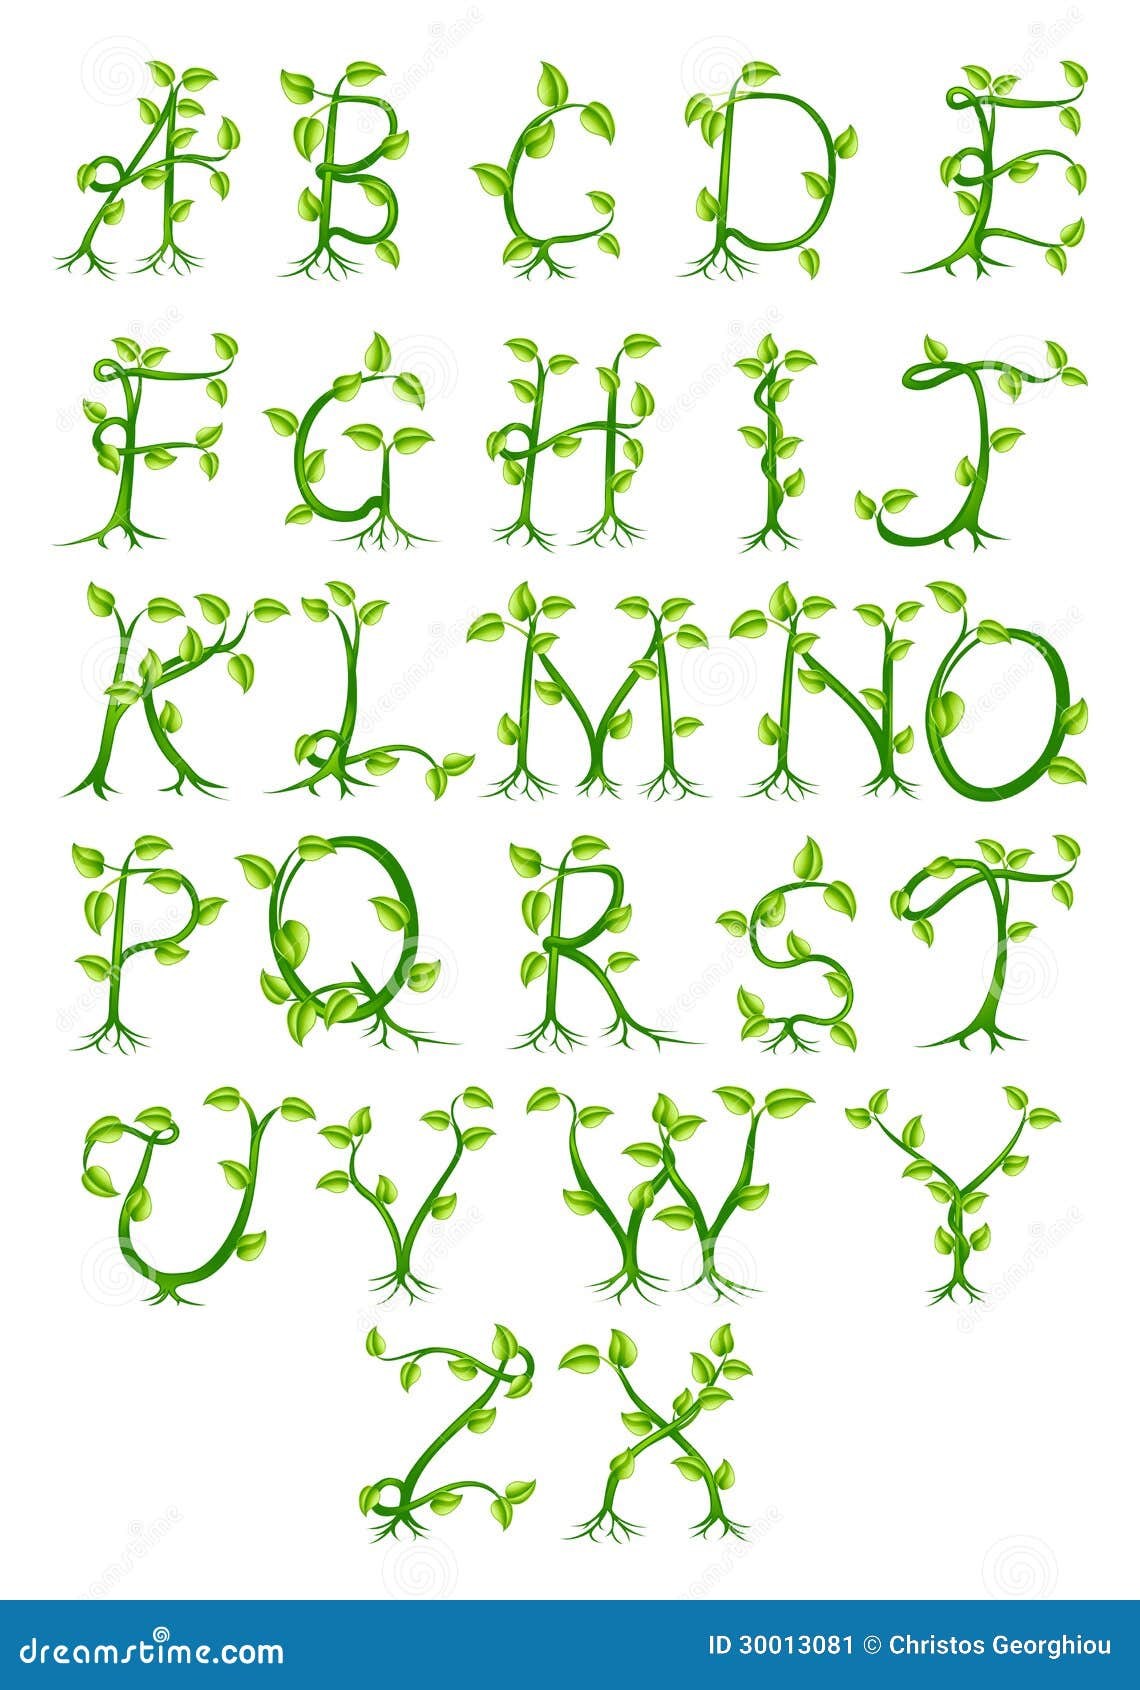 complete decorative alphabet made up letters growing green plants 30013081